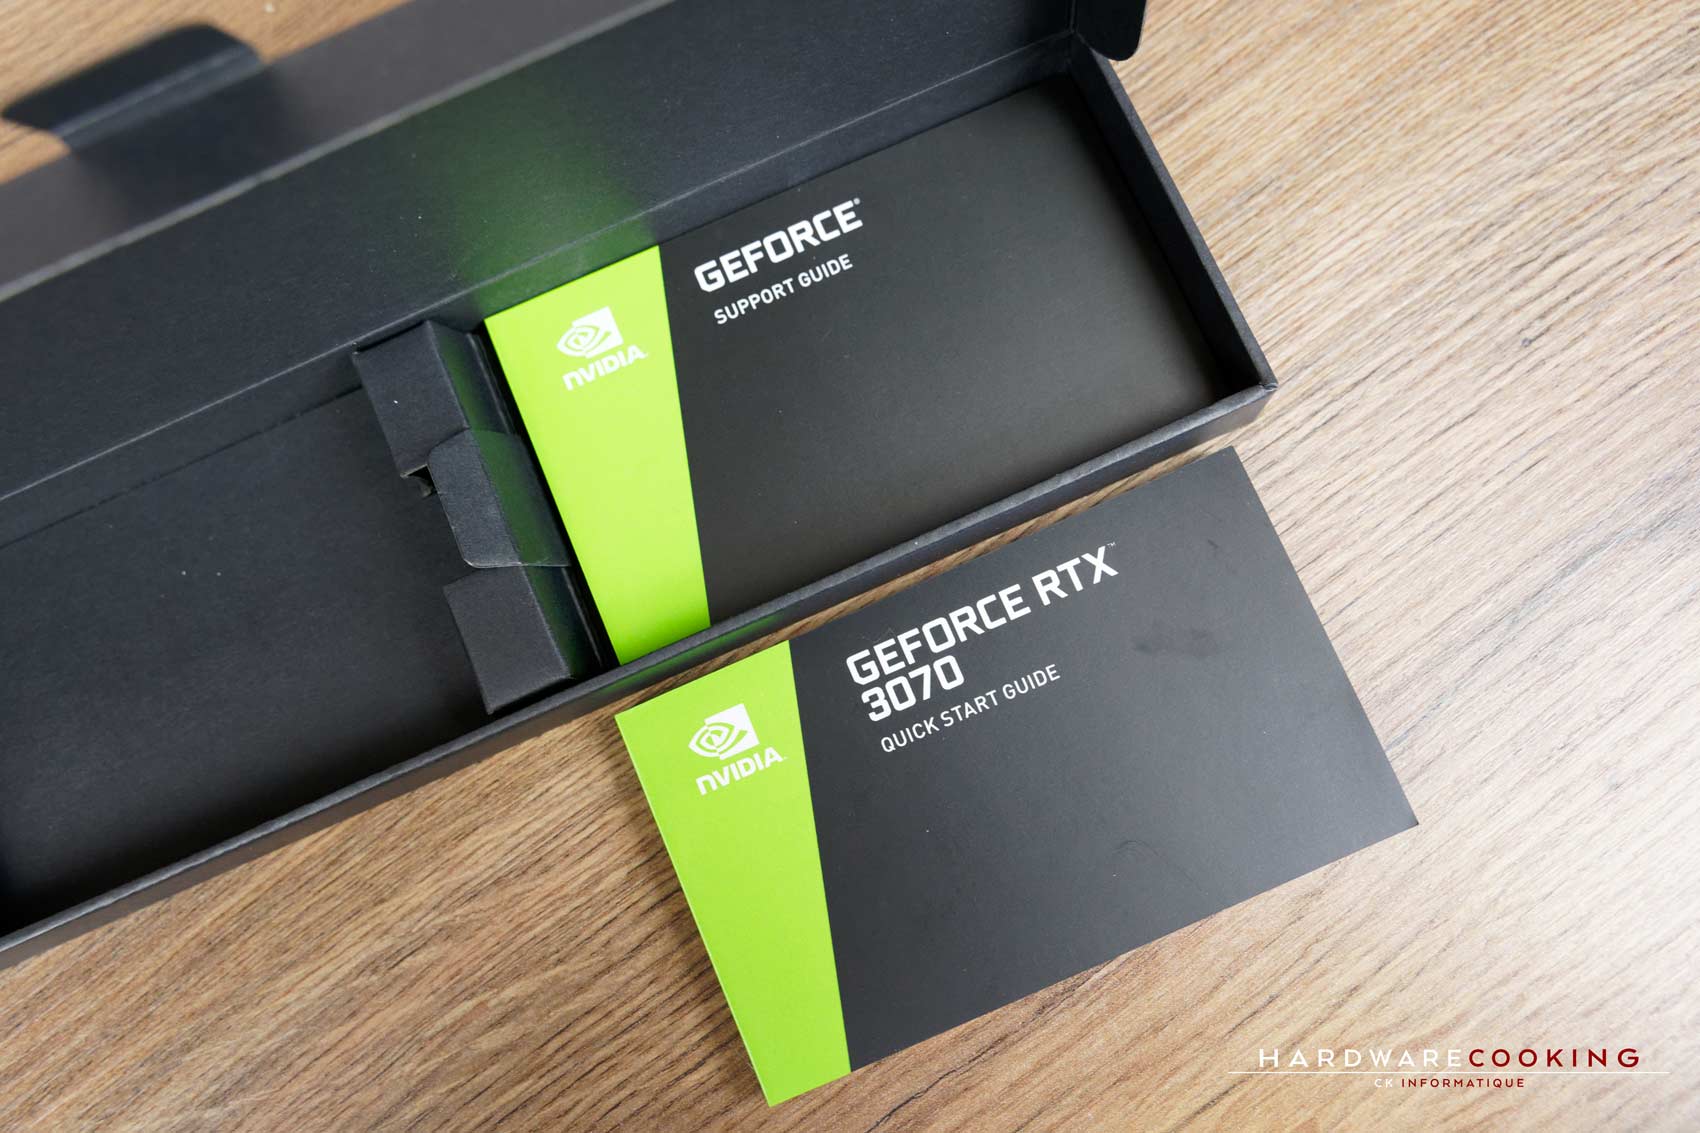 Test : NVIDIA GeForce RTX 3070 Founders Edition, le test complet